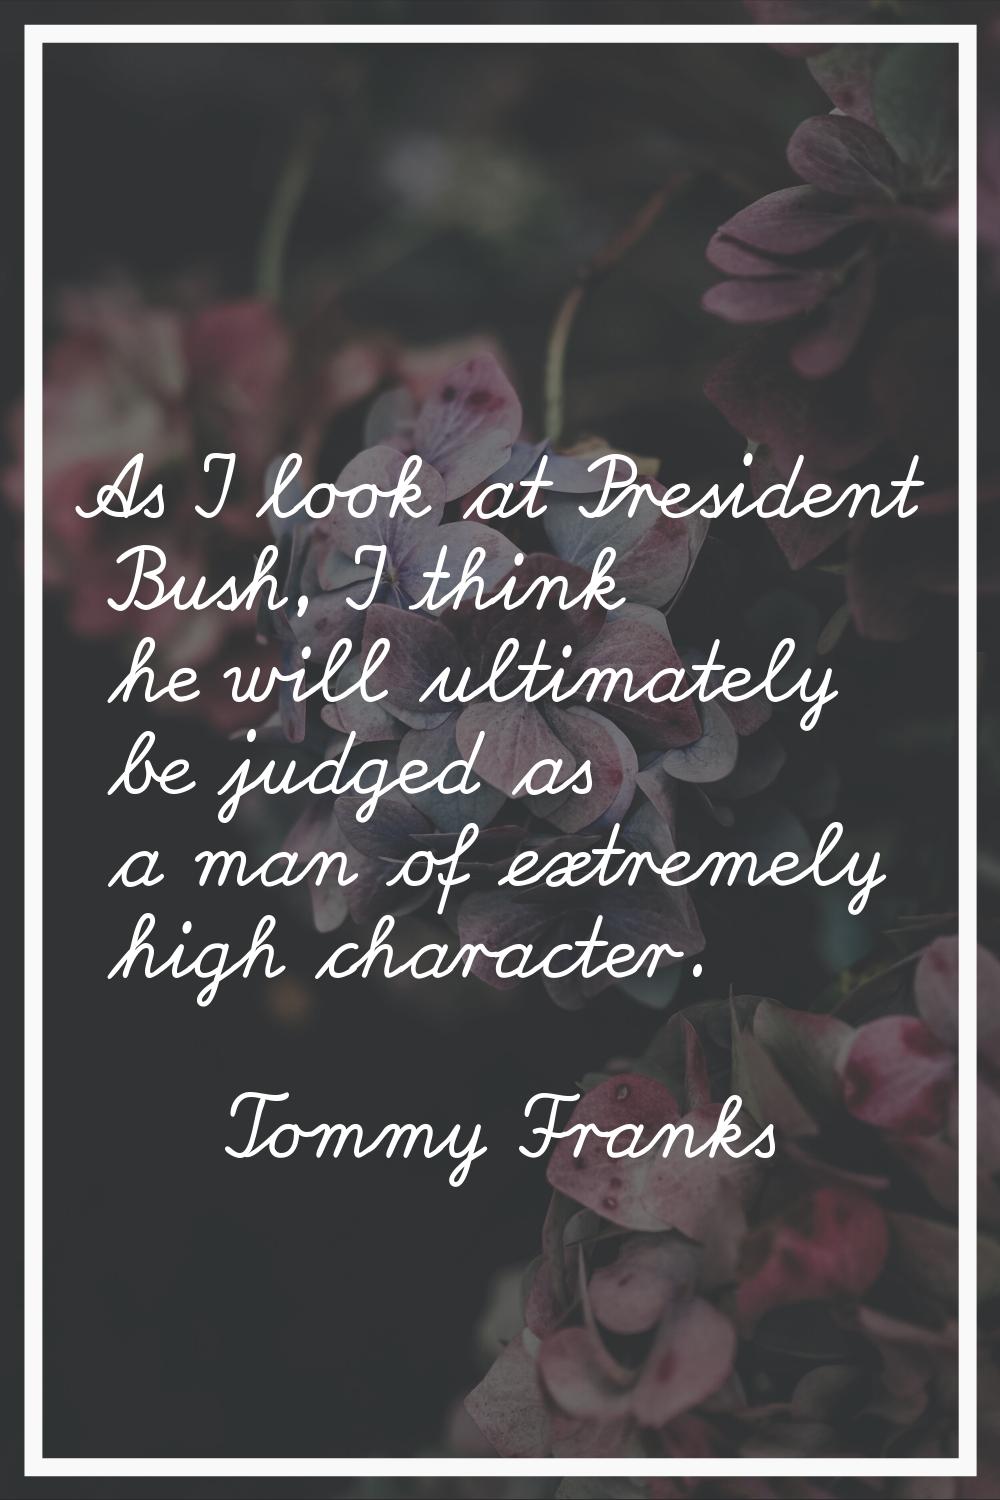 As I look at President Bush, I think he will ultimately be judged as a man of extremely high charac